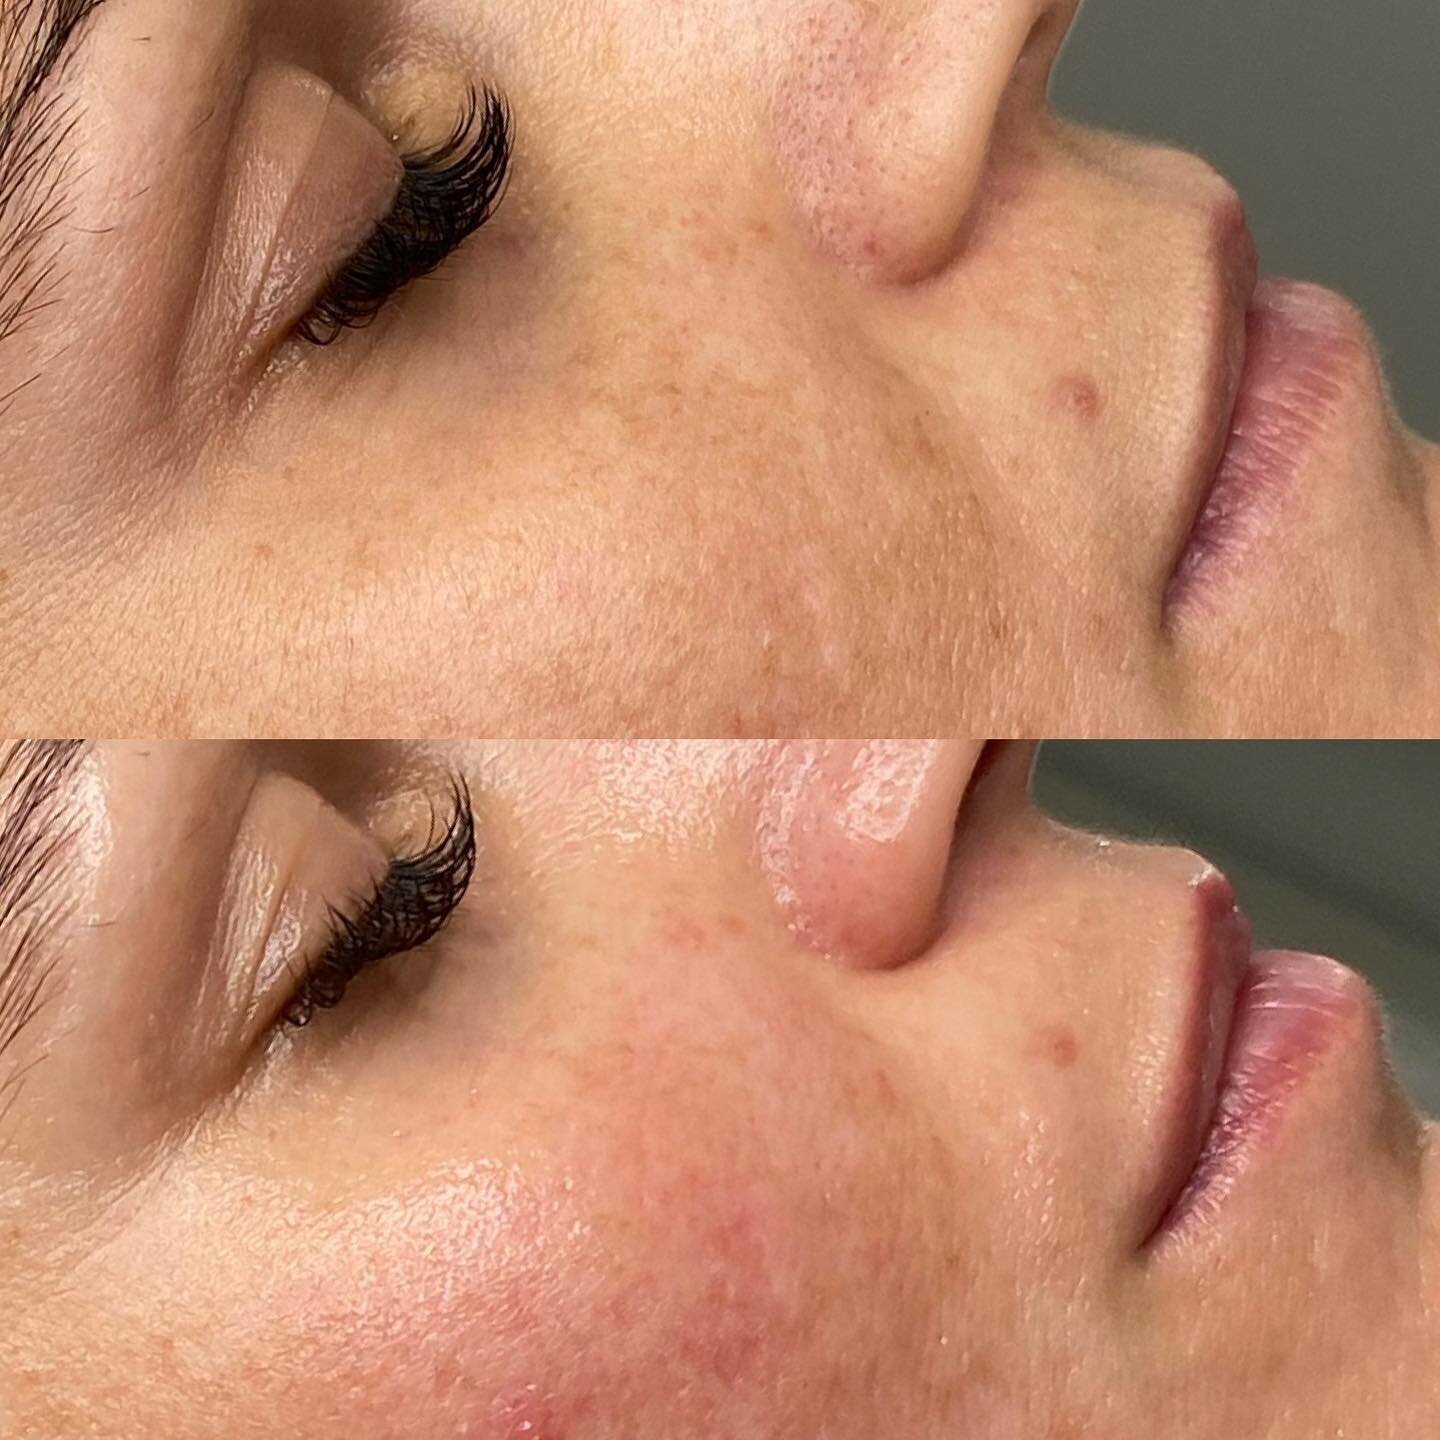 The difference between these two photos is only 90 minutes 💫

Notice the definition and lift to the lips, the plumping and lift through the naso labial folds, the lift and fullness through the cheeks. The colour and skin tone is brighter and more al